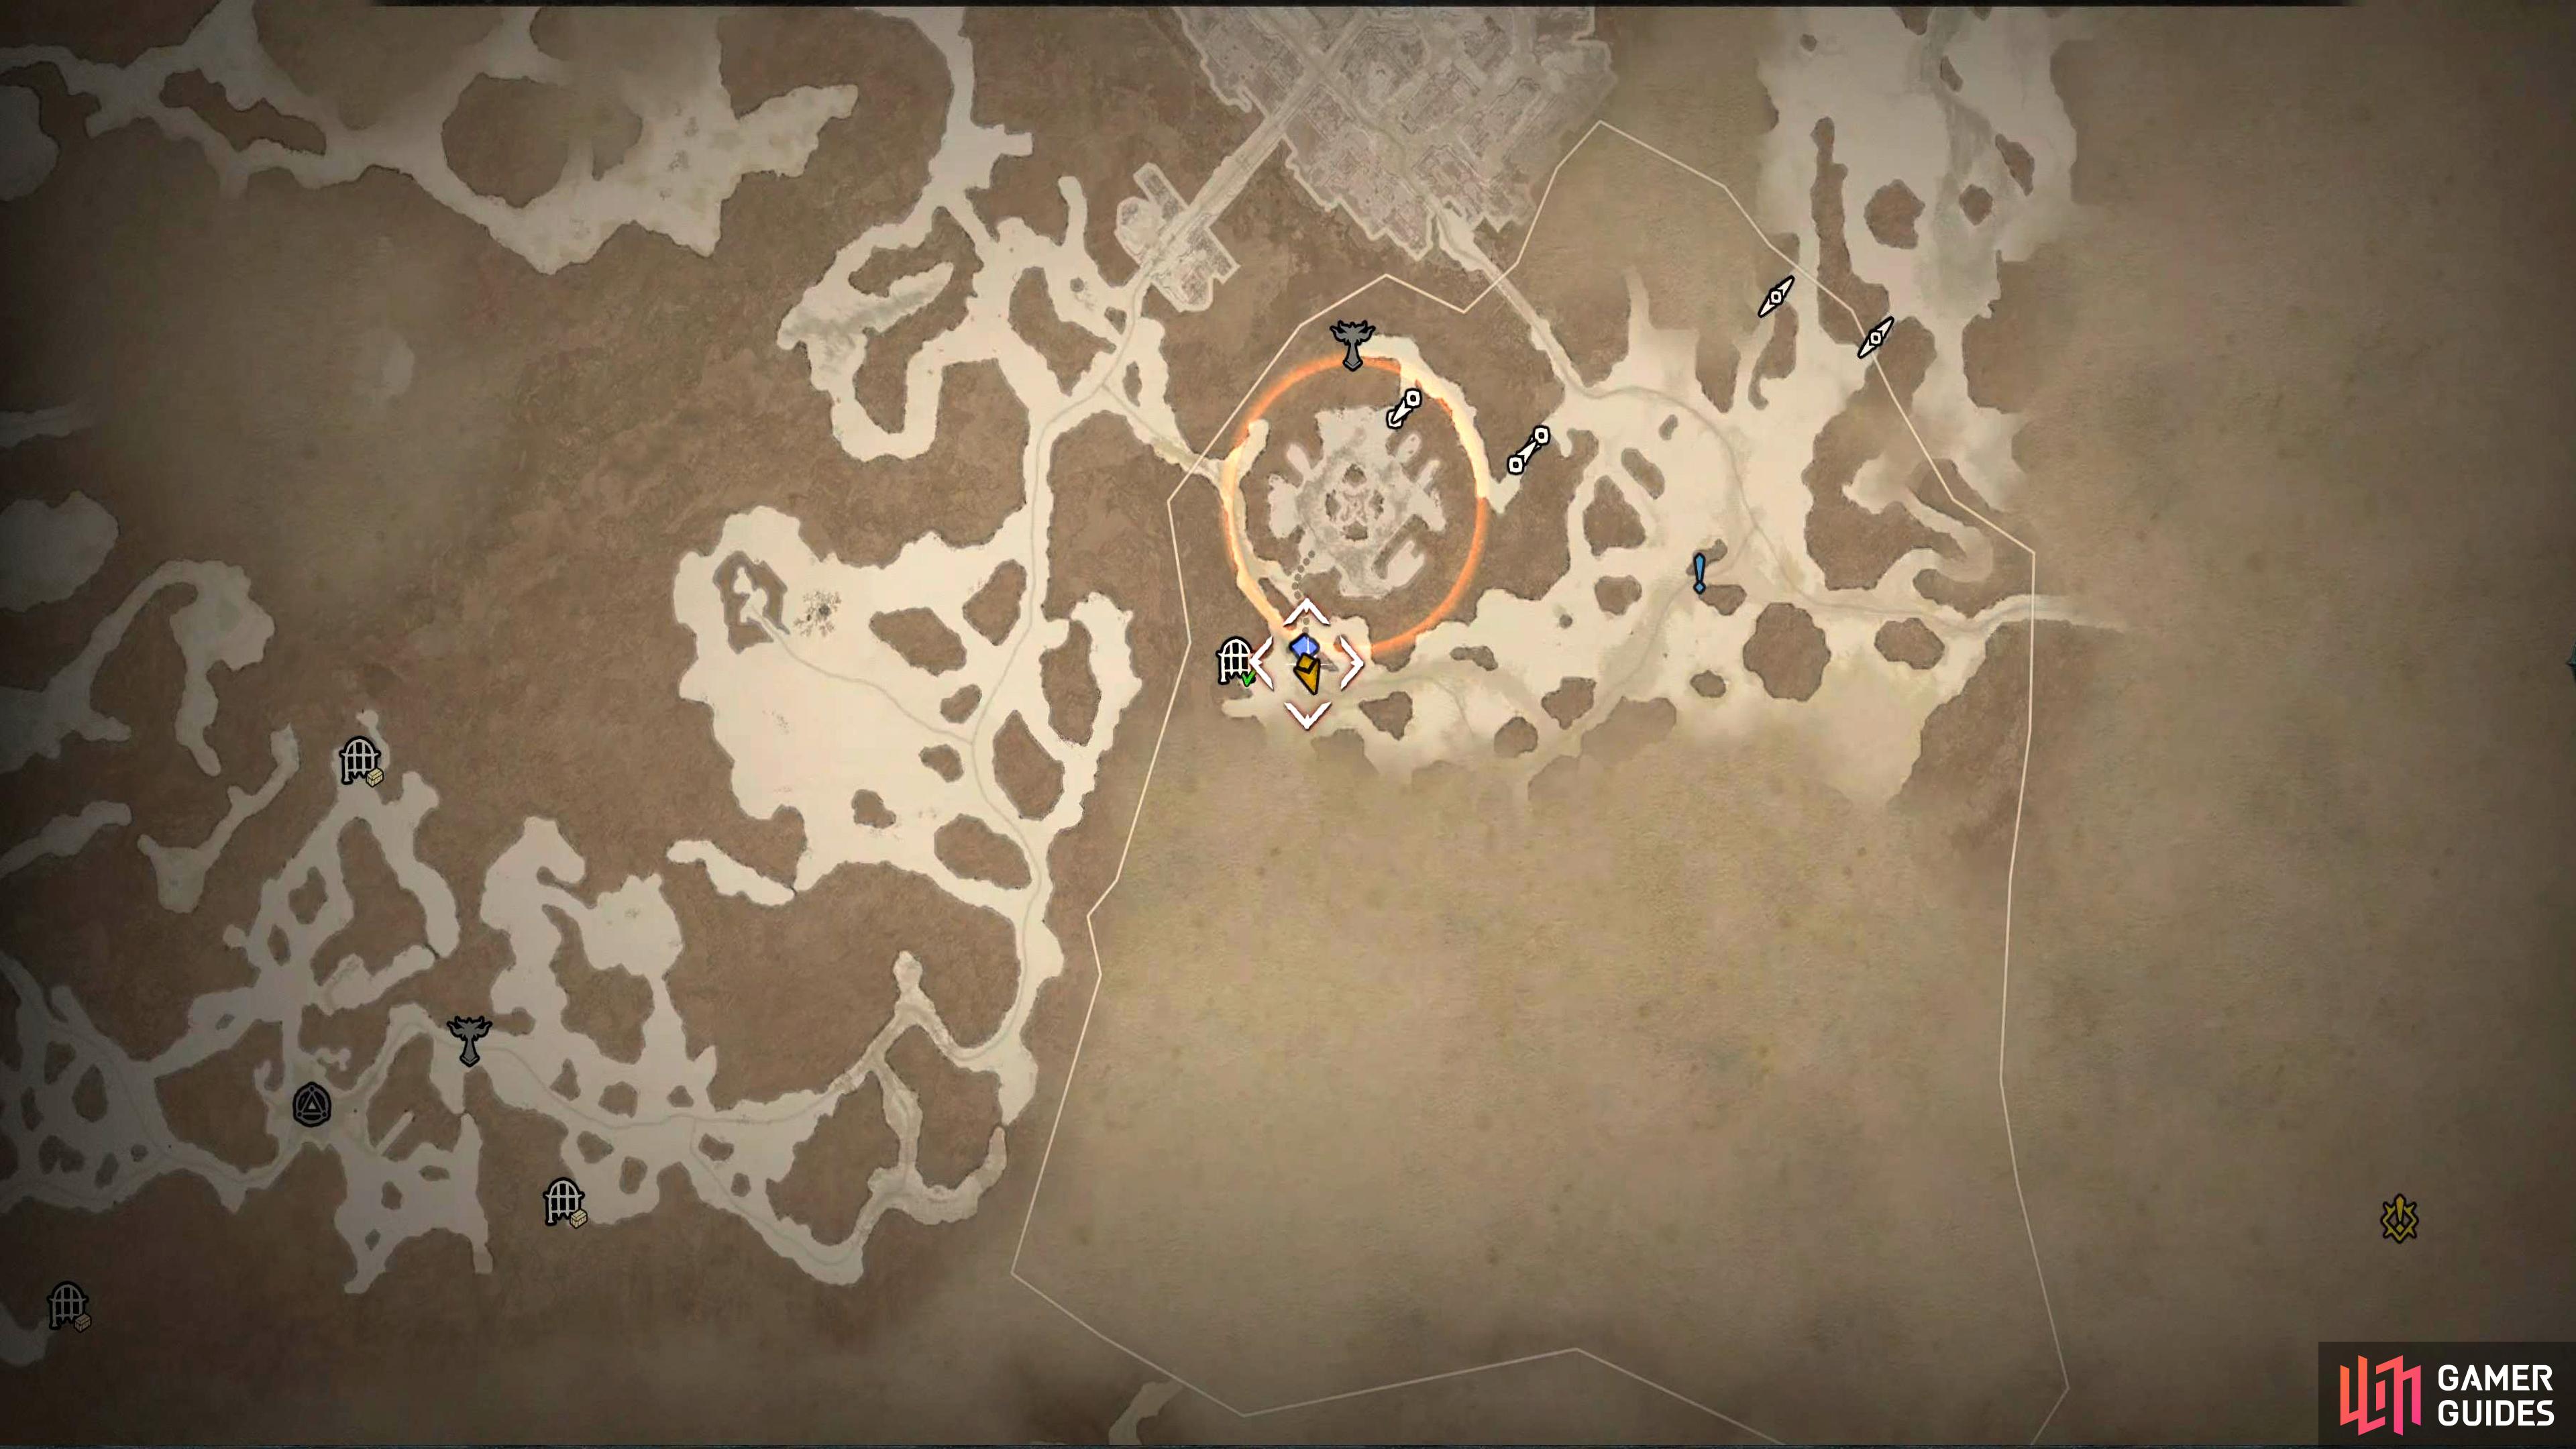 Open the world map, and you'll see an orange circle showing you there is an event in progress.